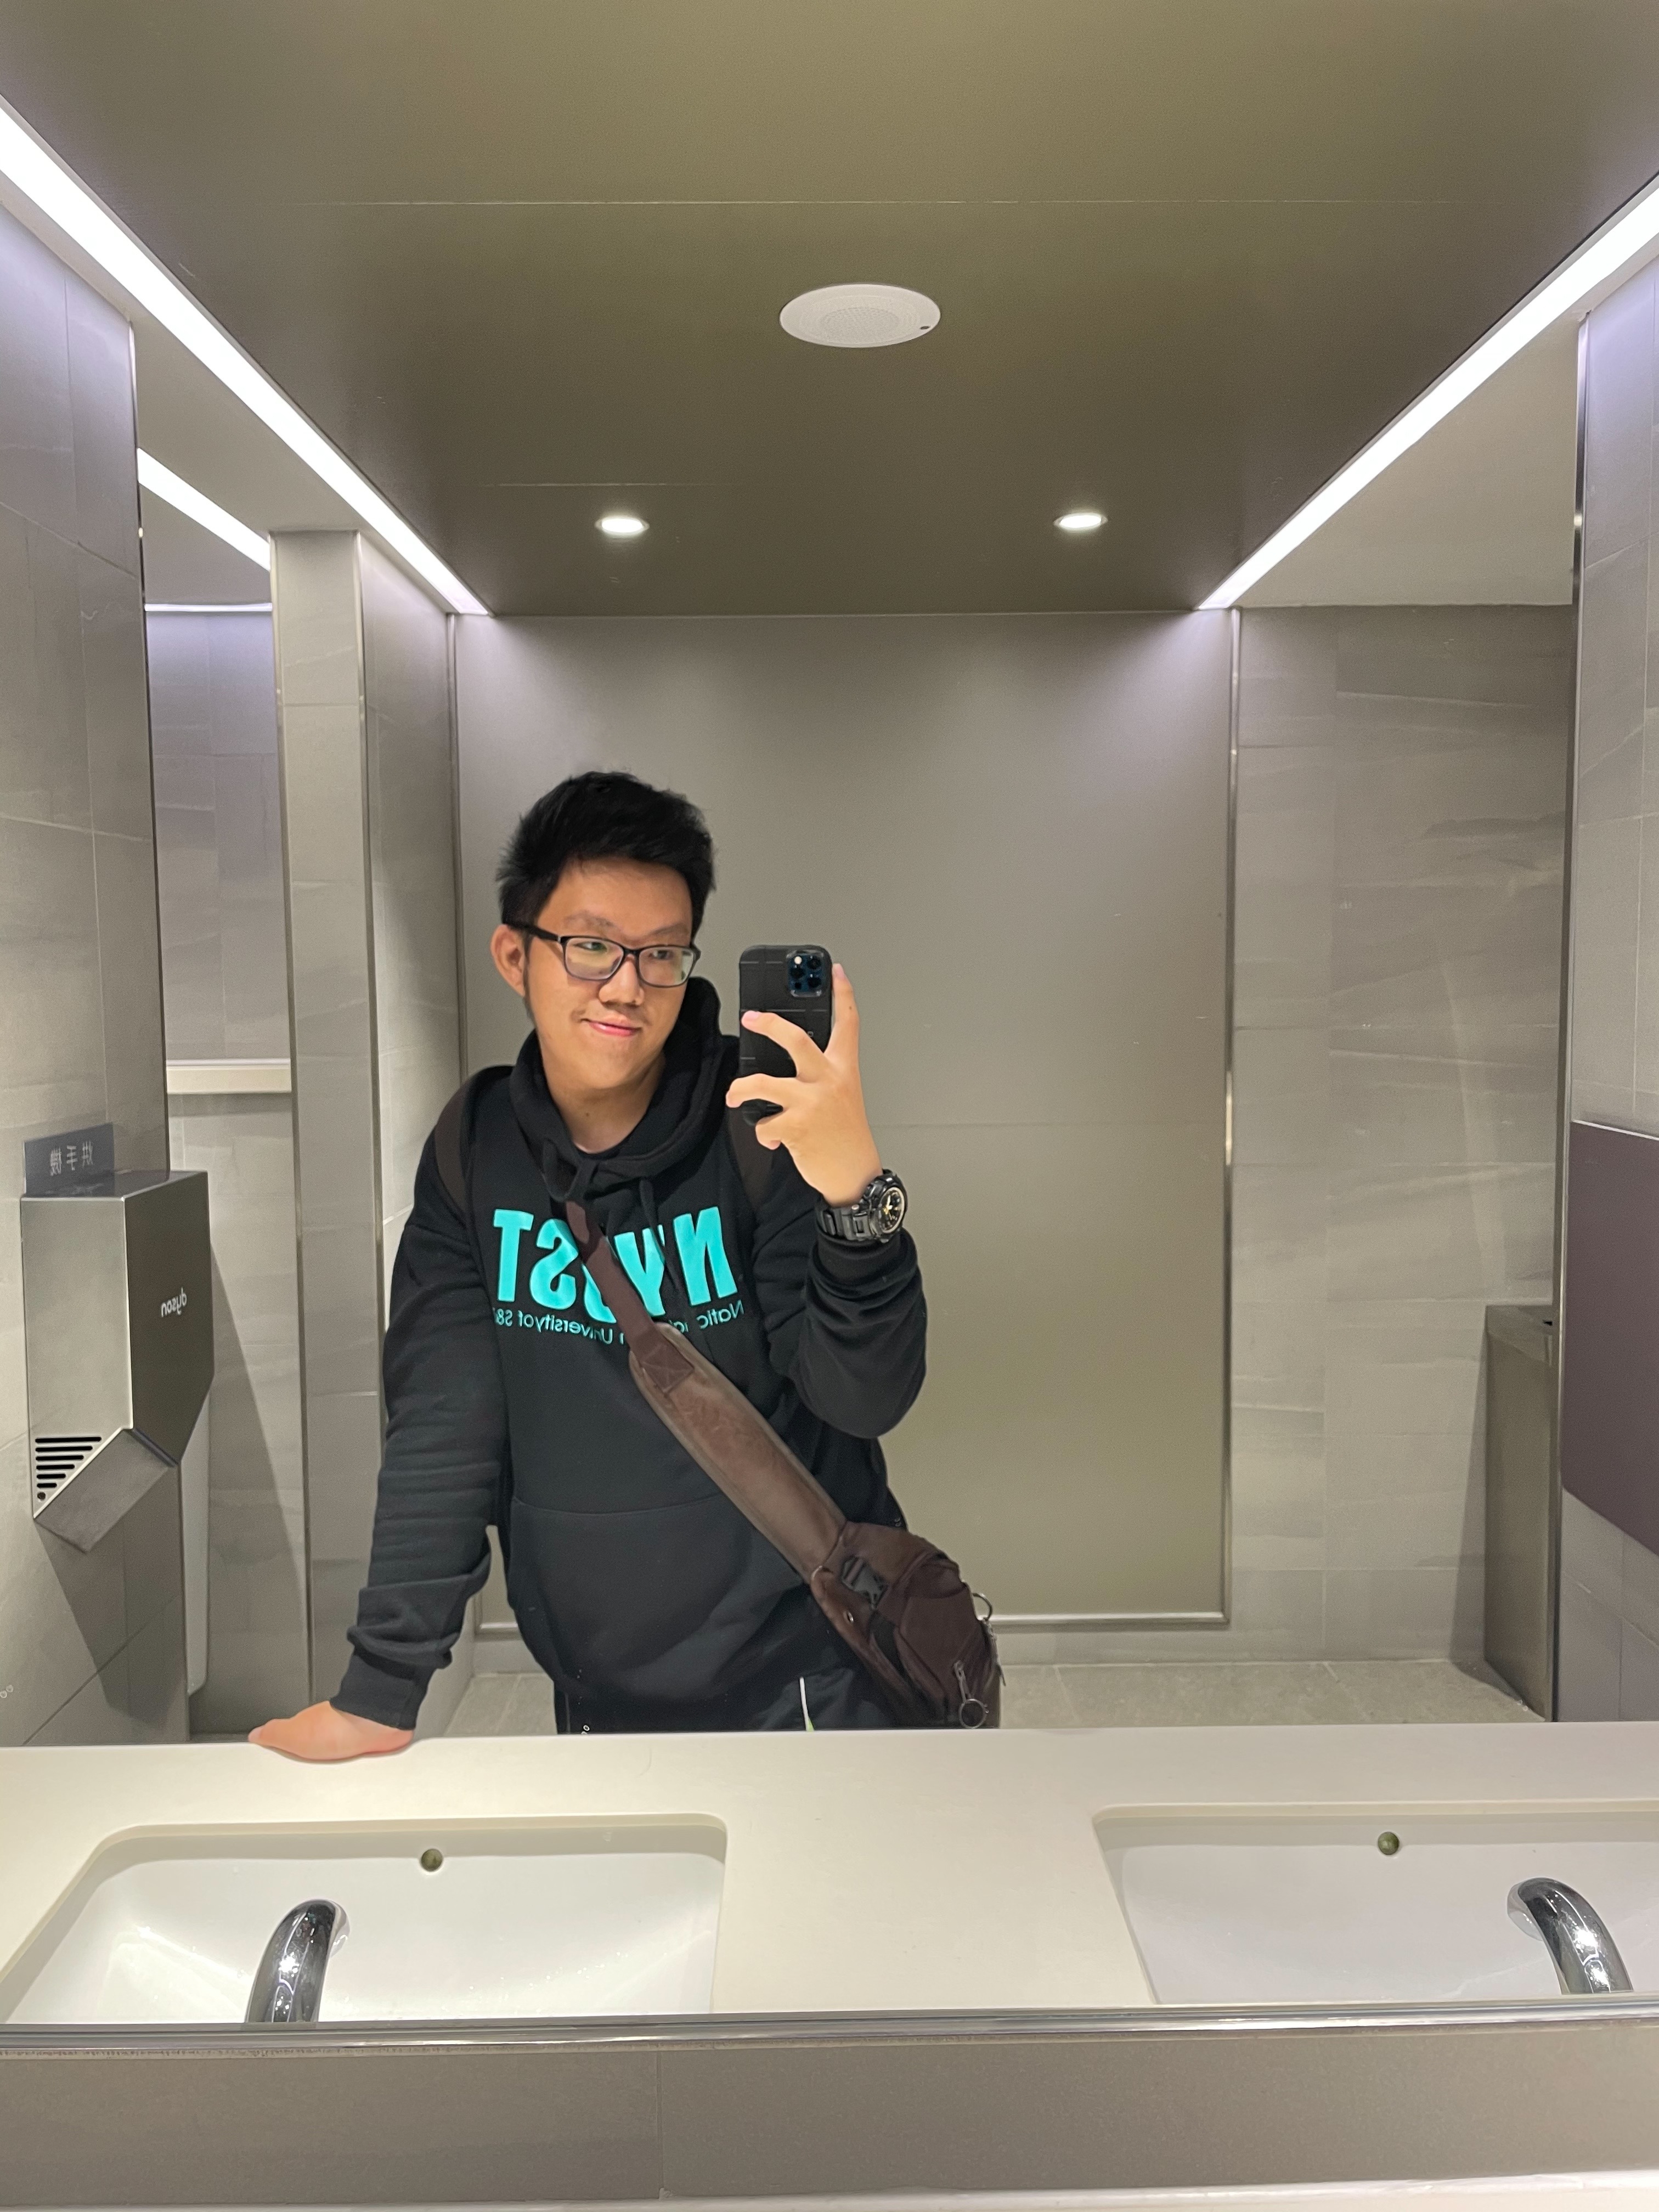 A Picture of me wearing a Black Yuntech Hoodie doing a mirror selfie in a restroom somewhere in Kaohsiung